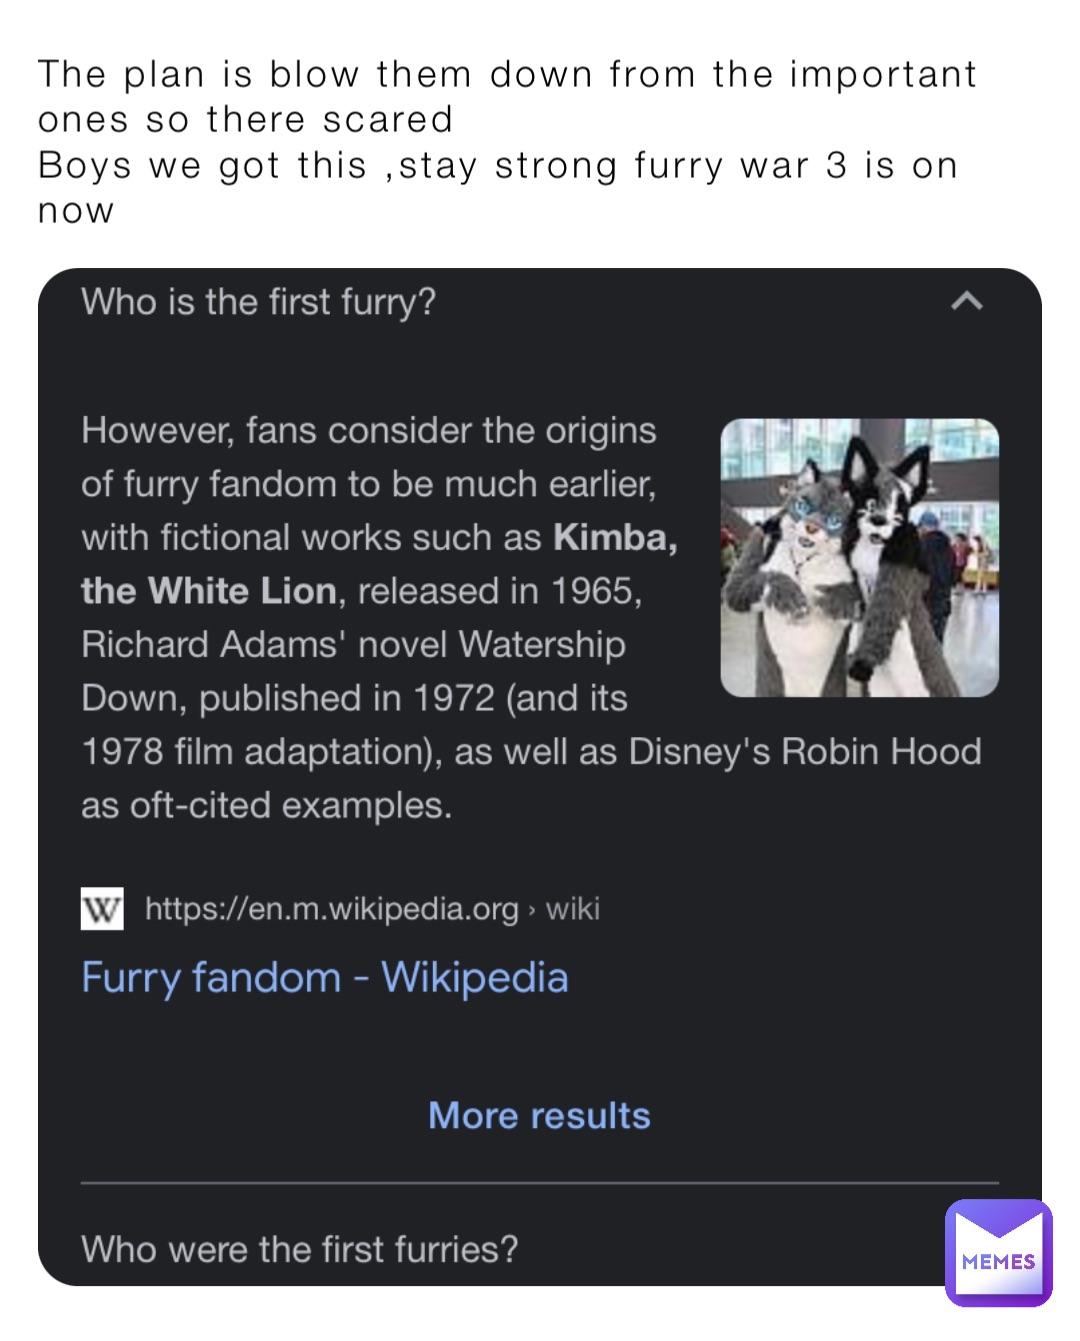 The plan is blow them down from the important ones so there scared
Boys we got this ,stay strong furry war 3 is on now